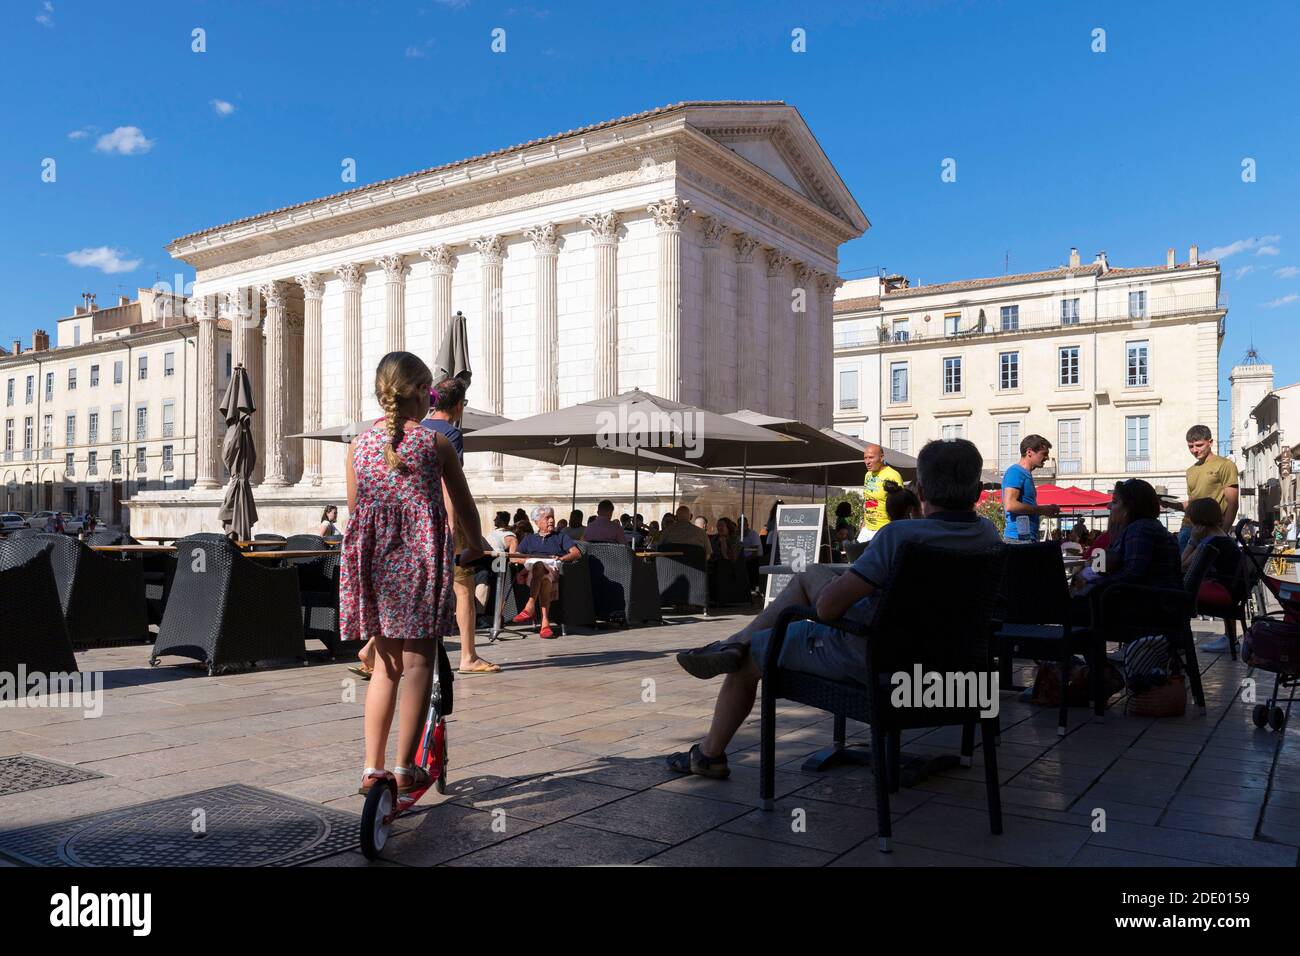 Nimes (south-eastern France): the Roman temple “Maison Carree” (Square House) viewed from the terrace of the “Ciel de Nimes” restaurant. Atmosphere on Stock Photo